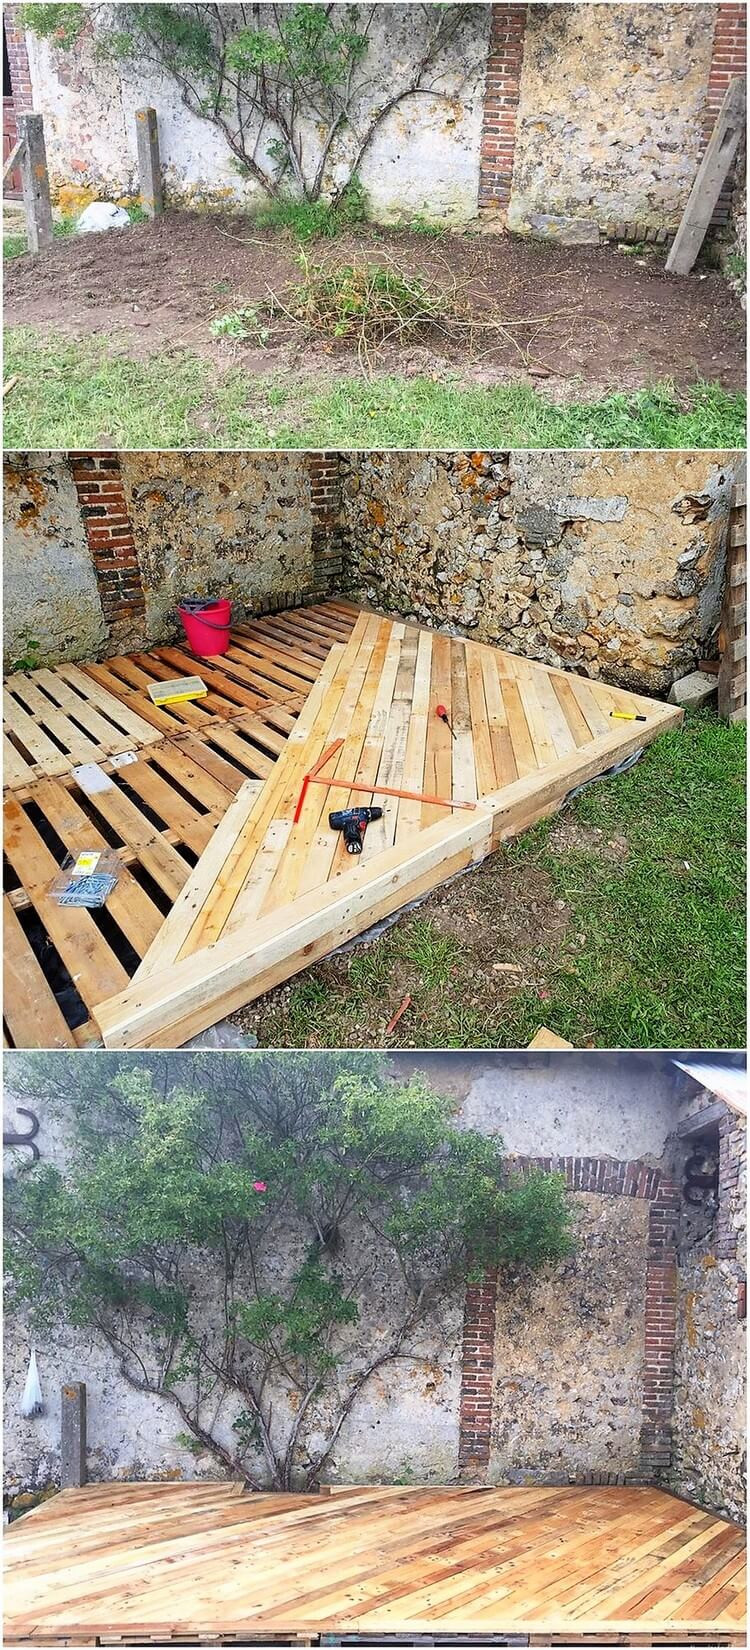 Terrace Landscape Diy
 Best and Cheapest Wood Pallet Recycling Ideas